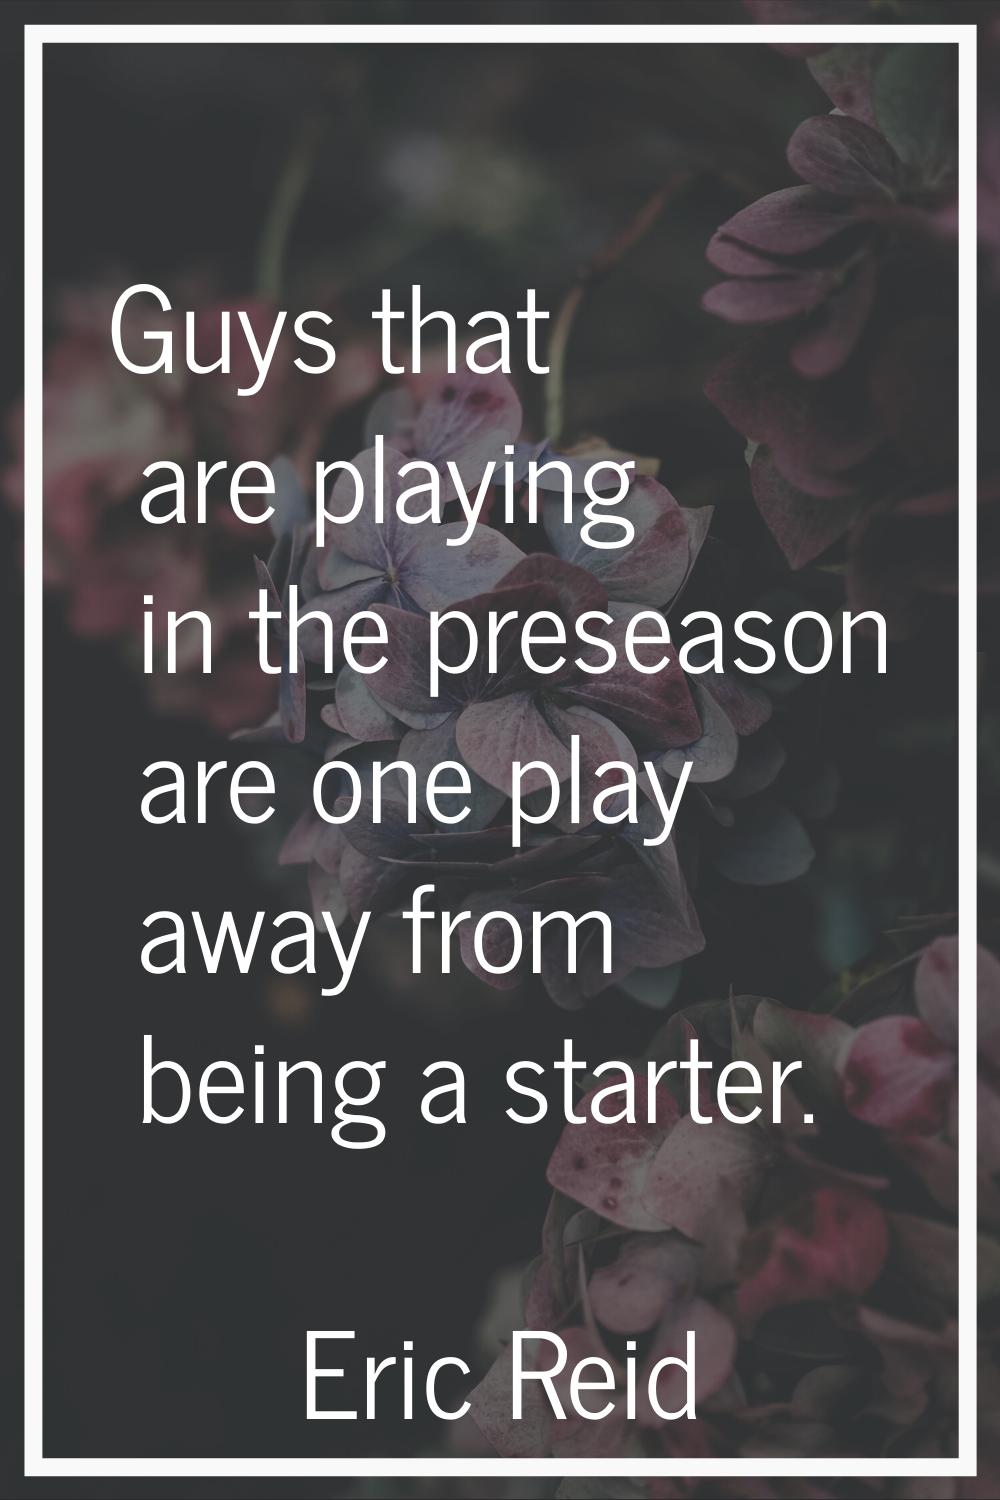 Guys that are playing in the preseason are one play away from being a starter.